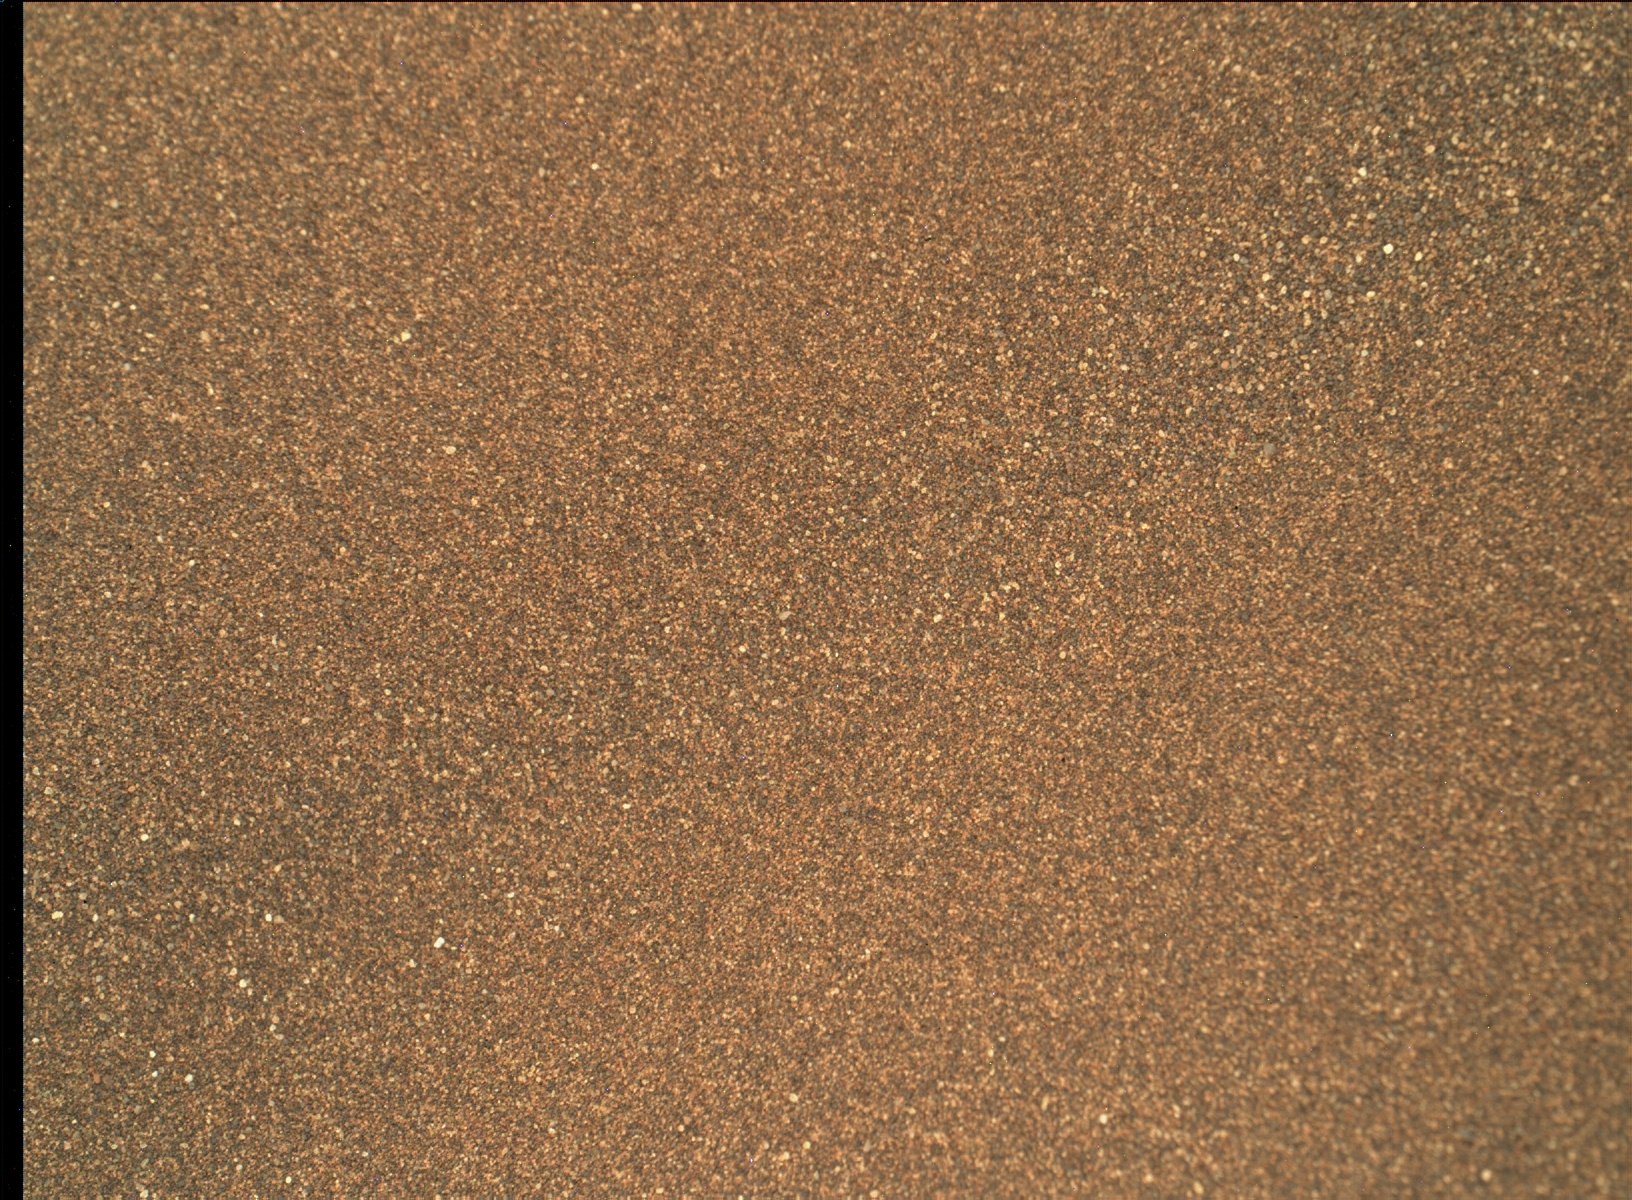 Nasa's Mars rover Curiosity acquired this image using its Mars Hand Lens Imager (MAHLI) on Sol 1657